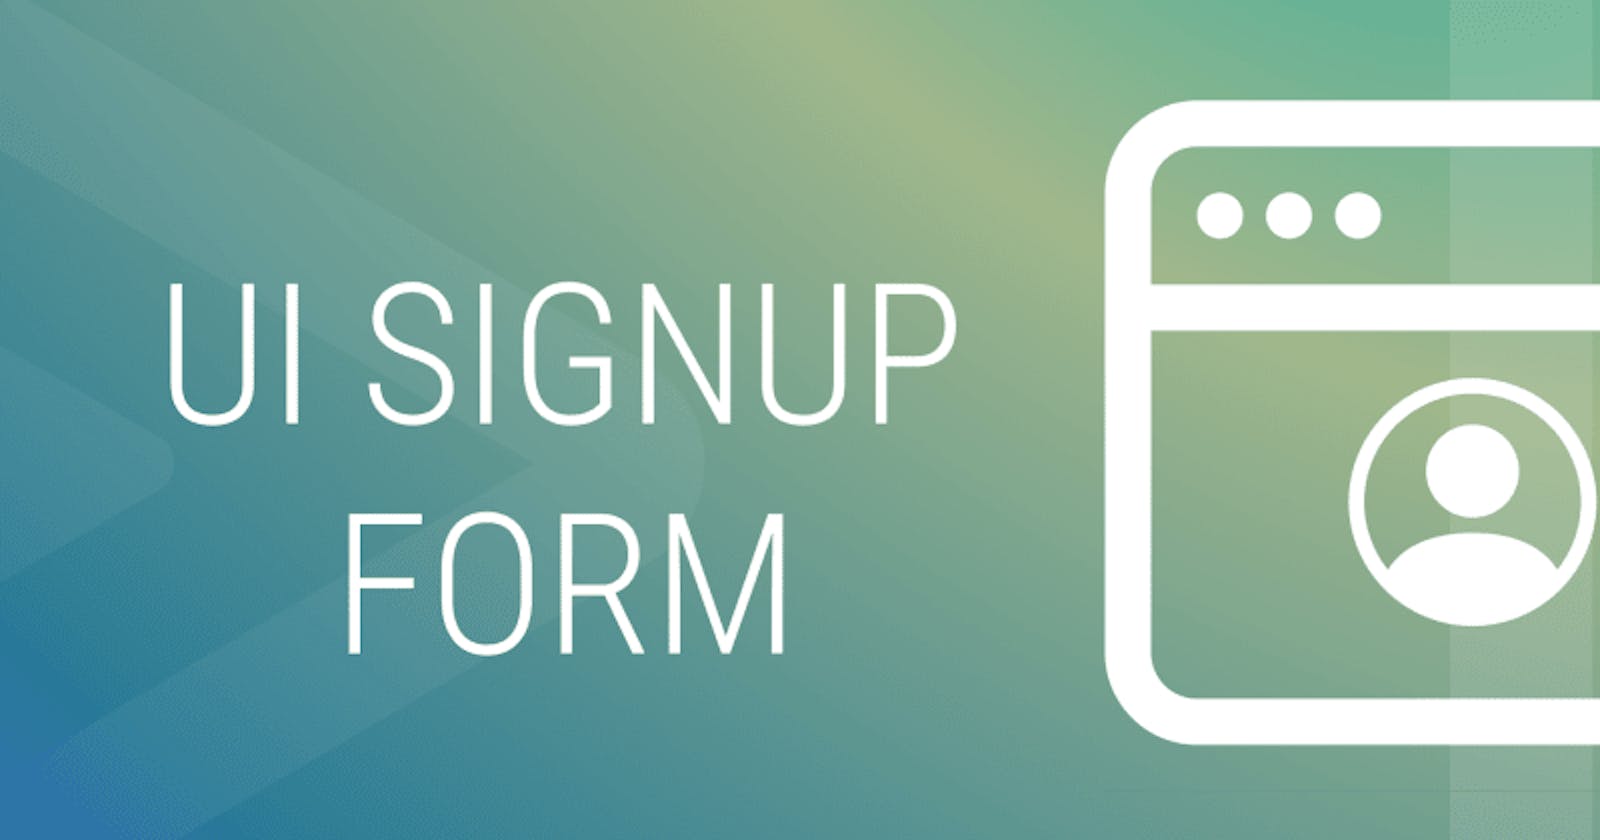 Building a Responsive Sign Up Form